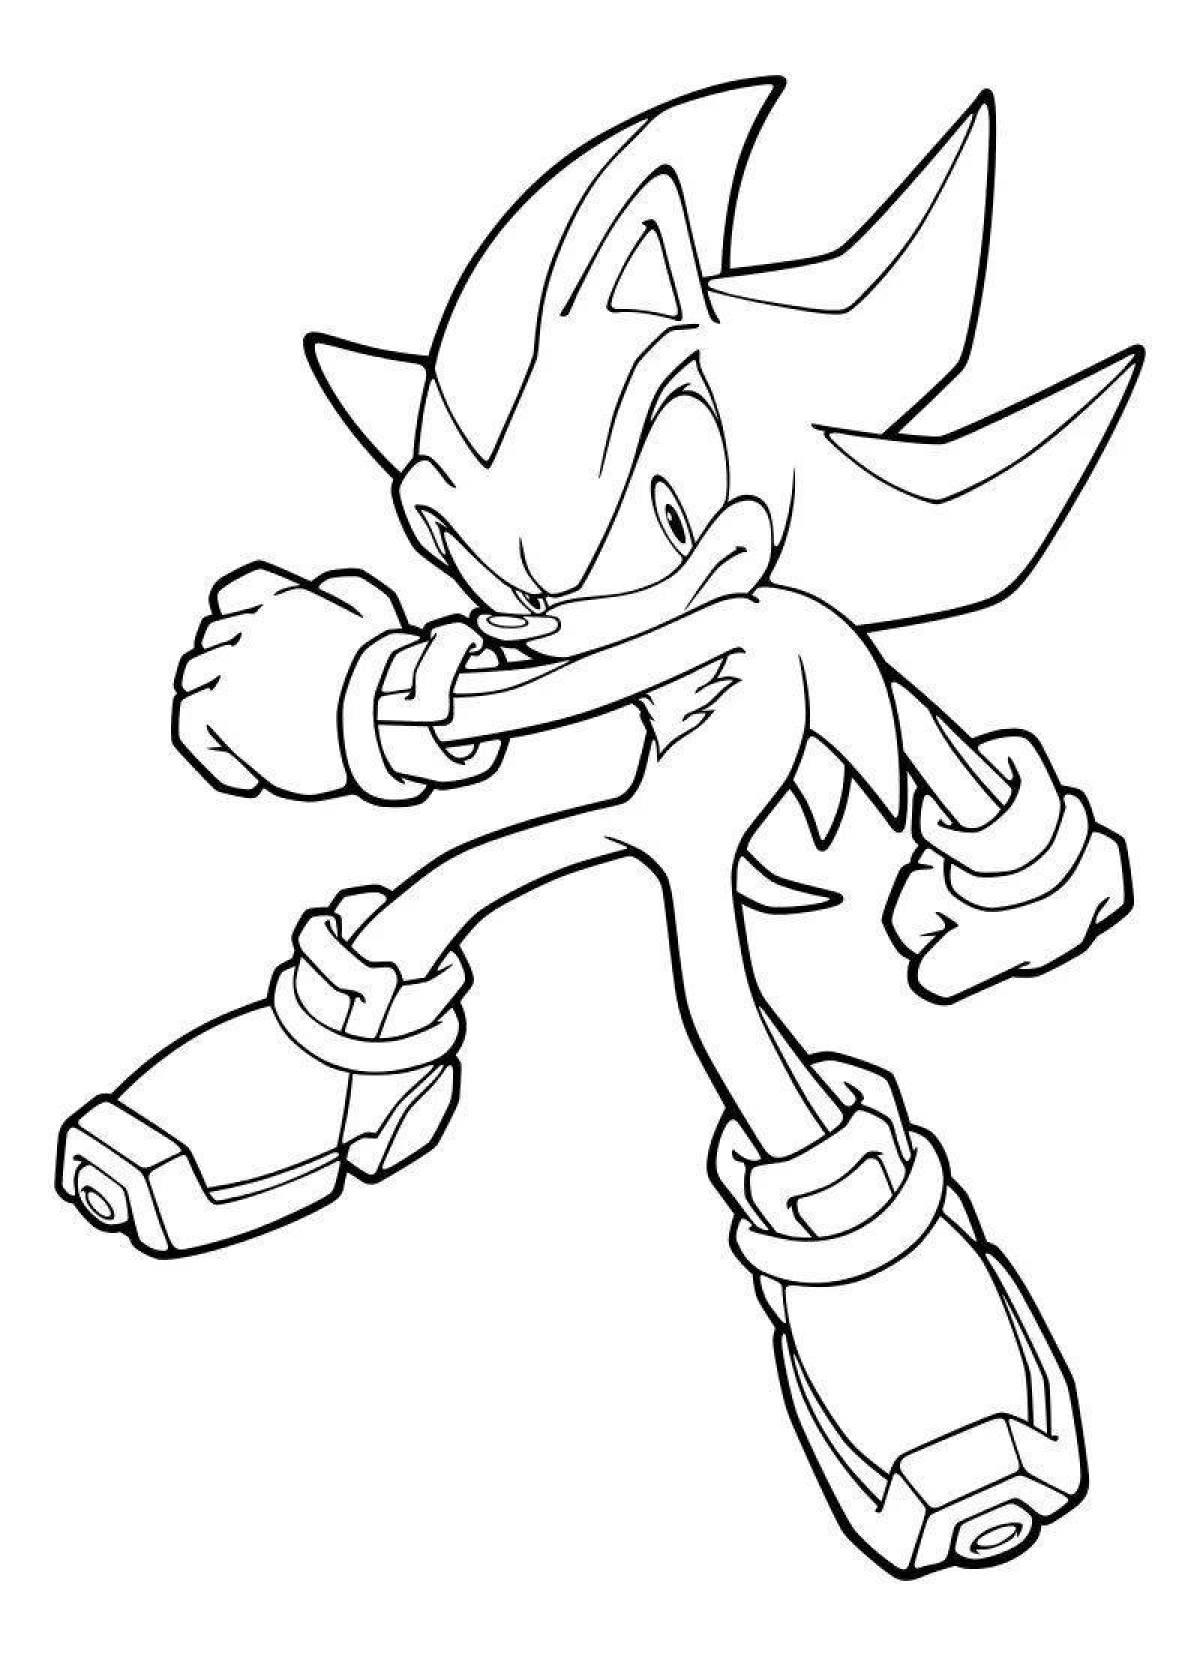 Bright blue sonic coloring page